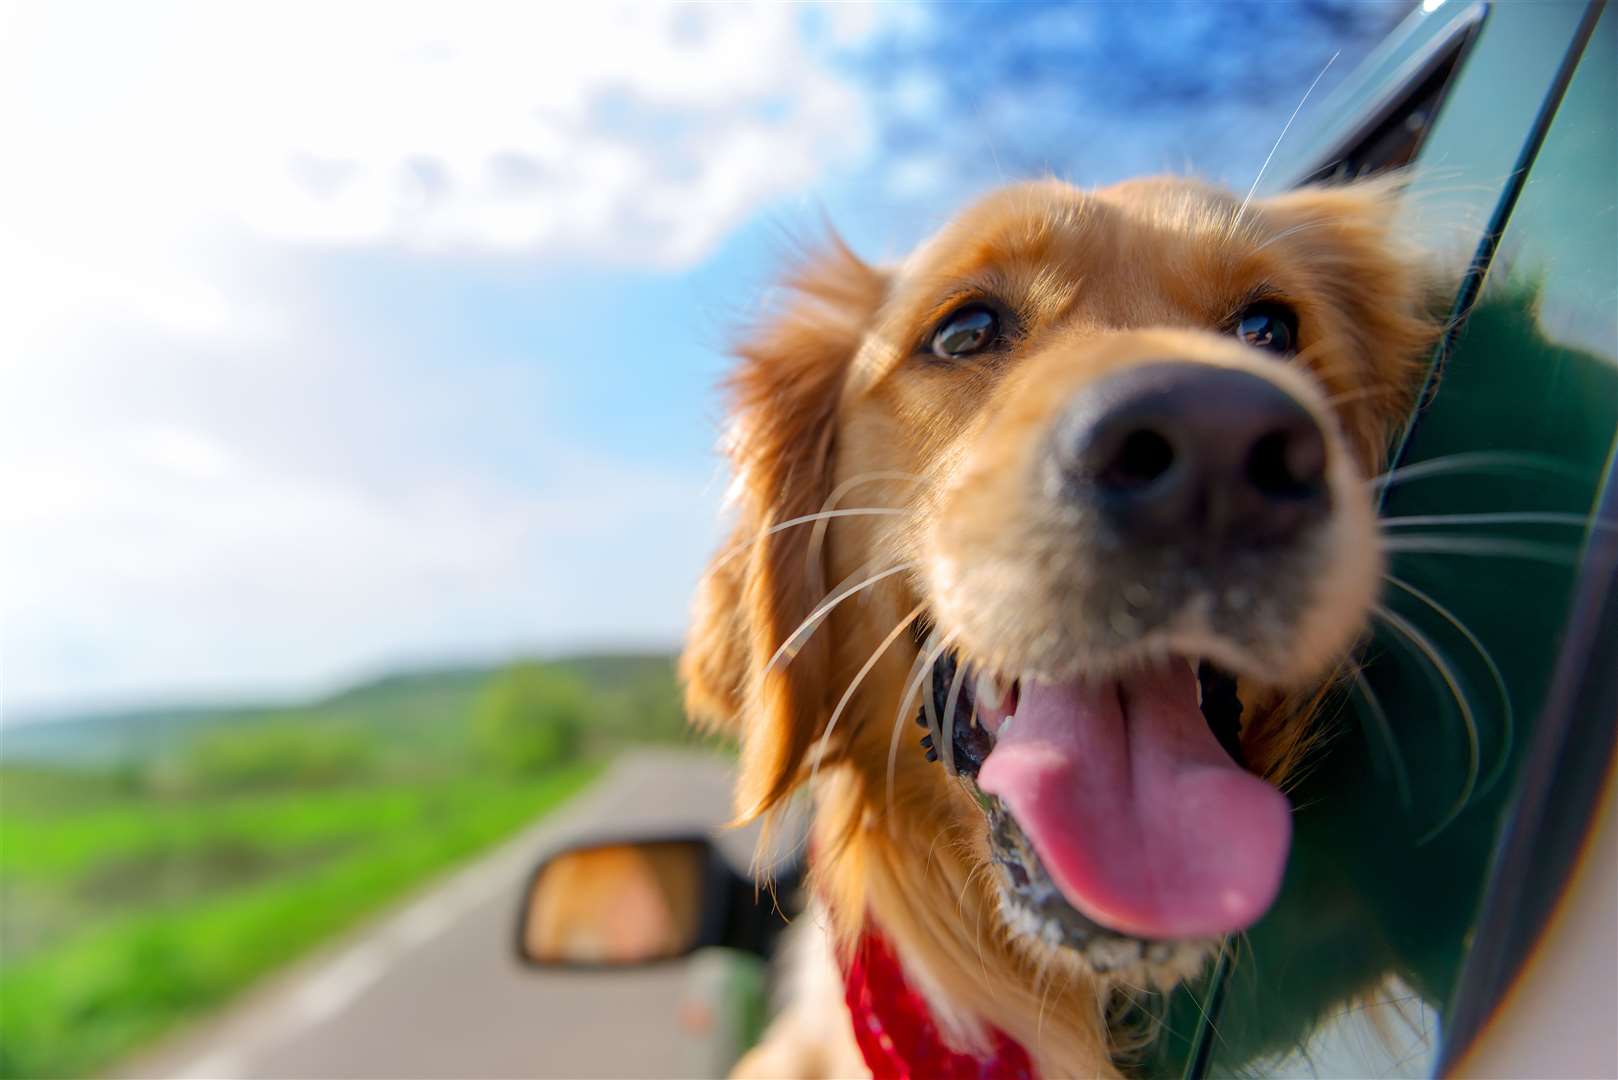 Golden retrievers are excellent human companions. Image: iStock.